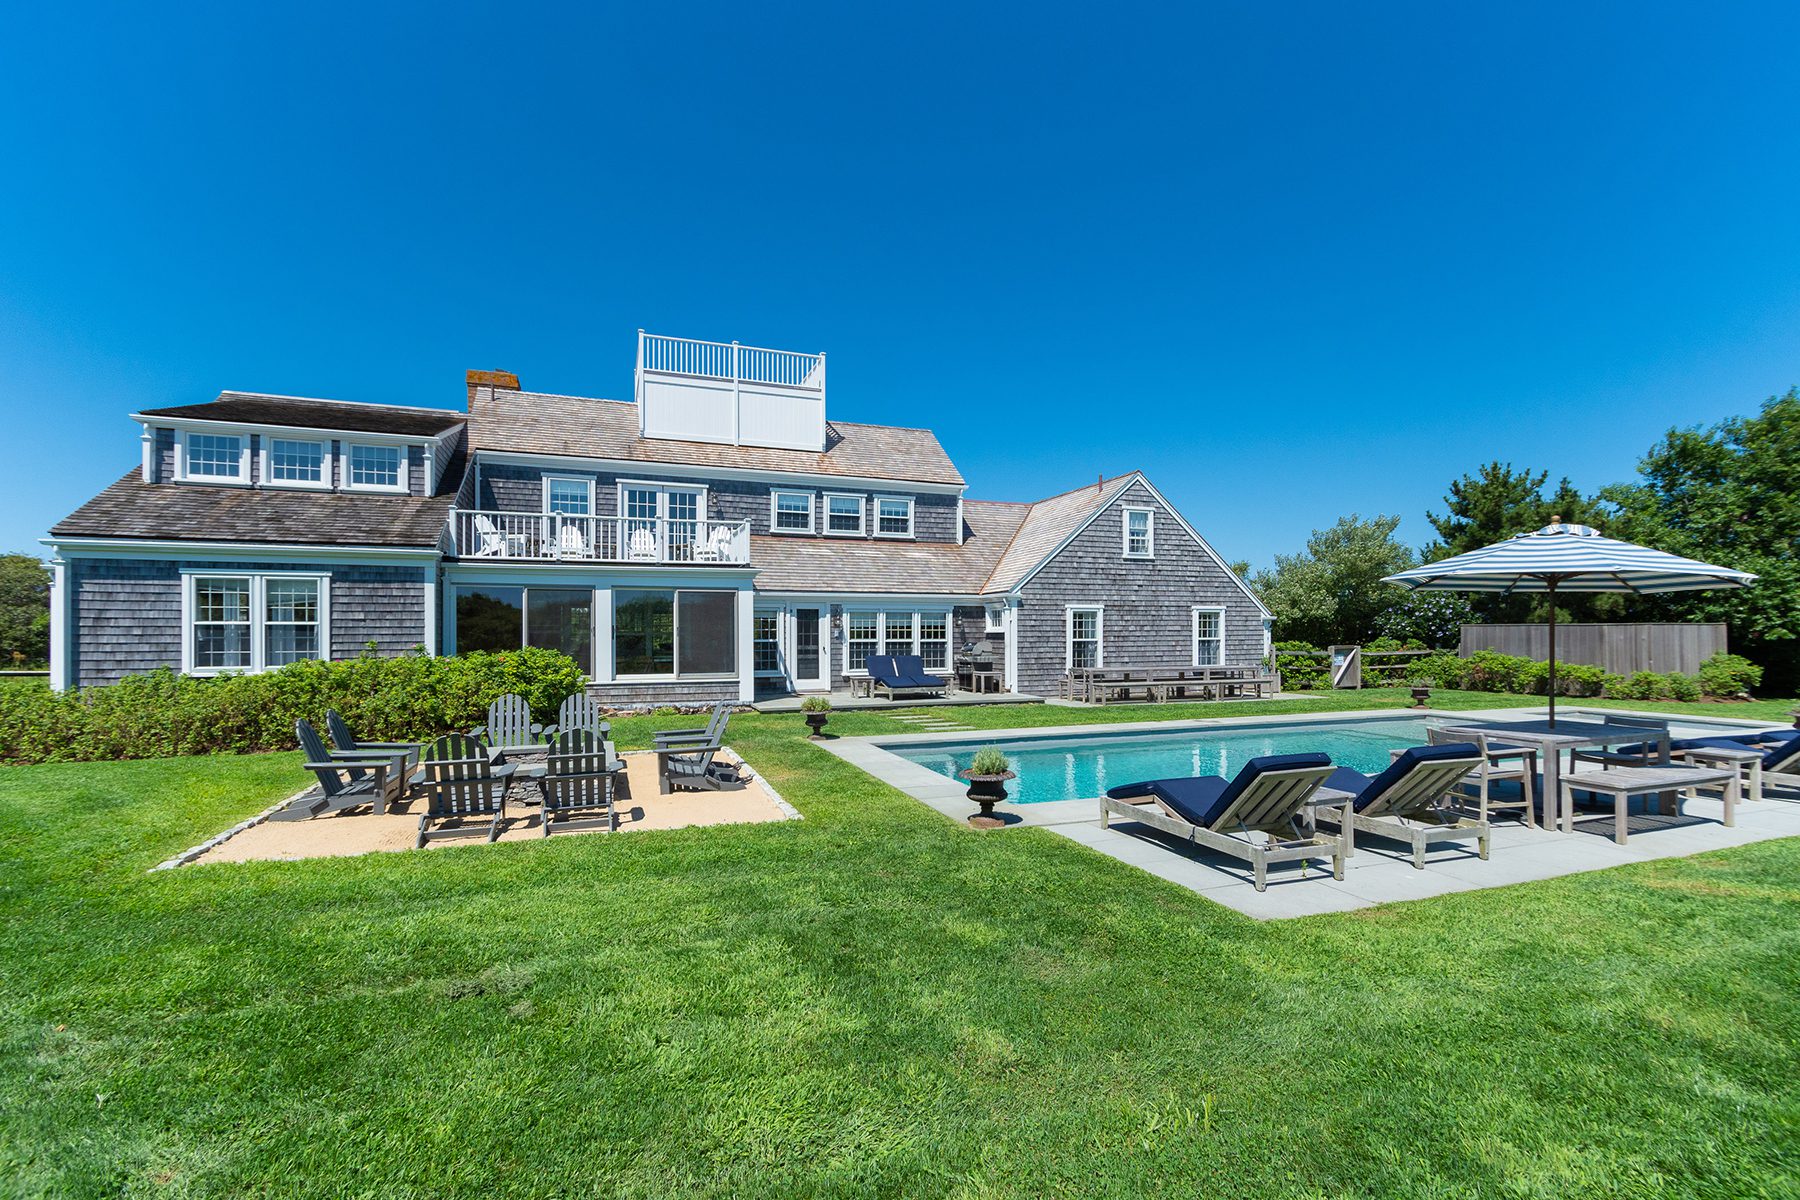 7-21 Quidnet Rd Nantucket Family Compound Tennis Pool Pickleball